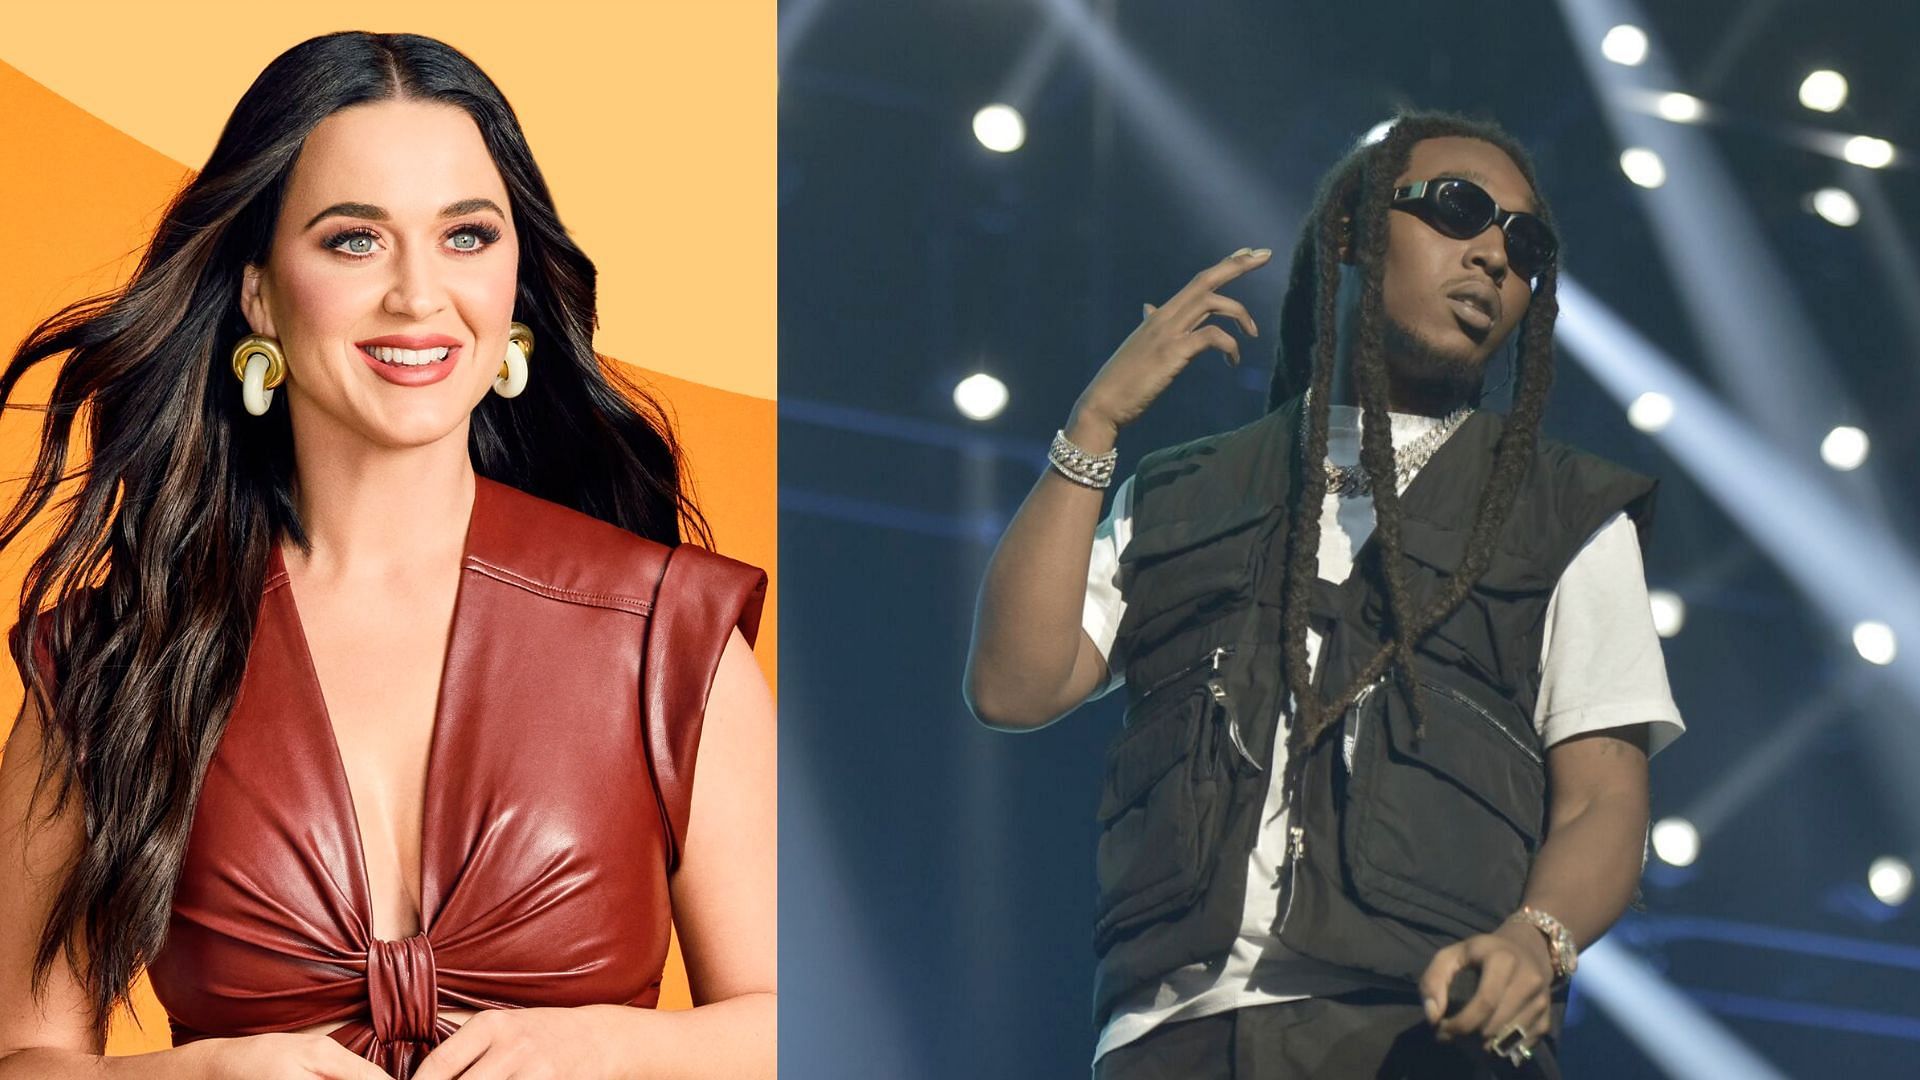 Perry and Takeoff relationship explored (image via Getty/Richard Shotwell &amp; Gavin bond)